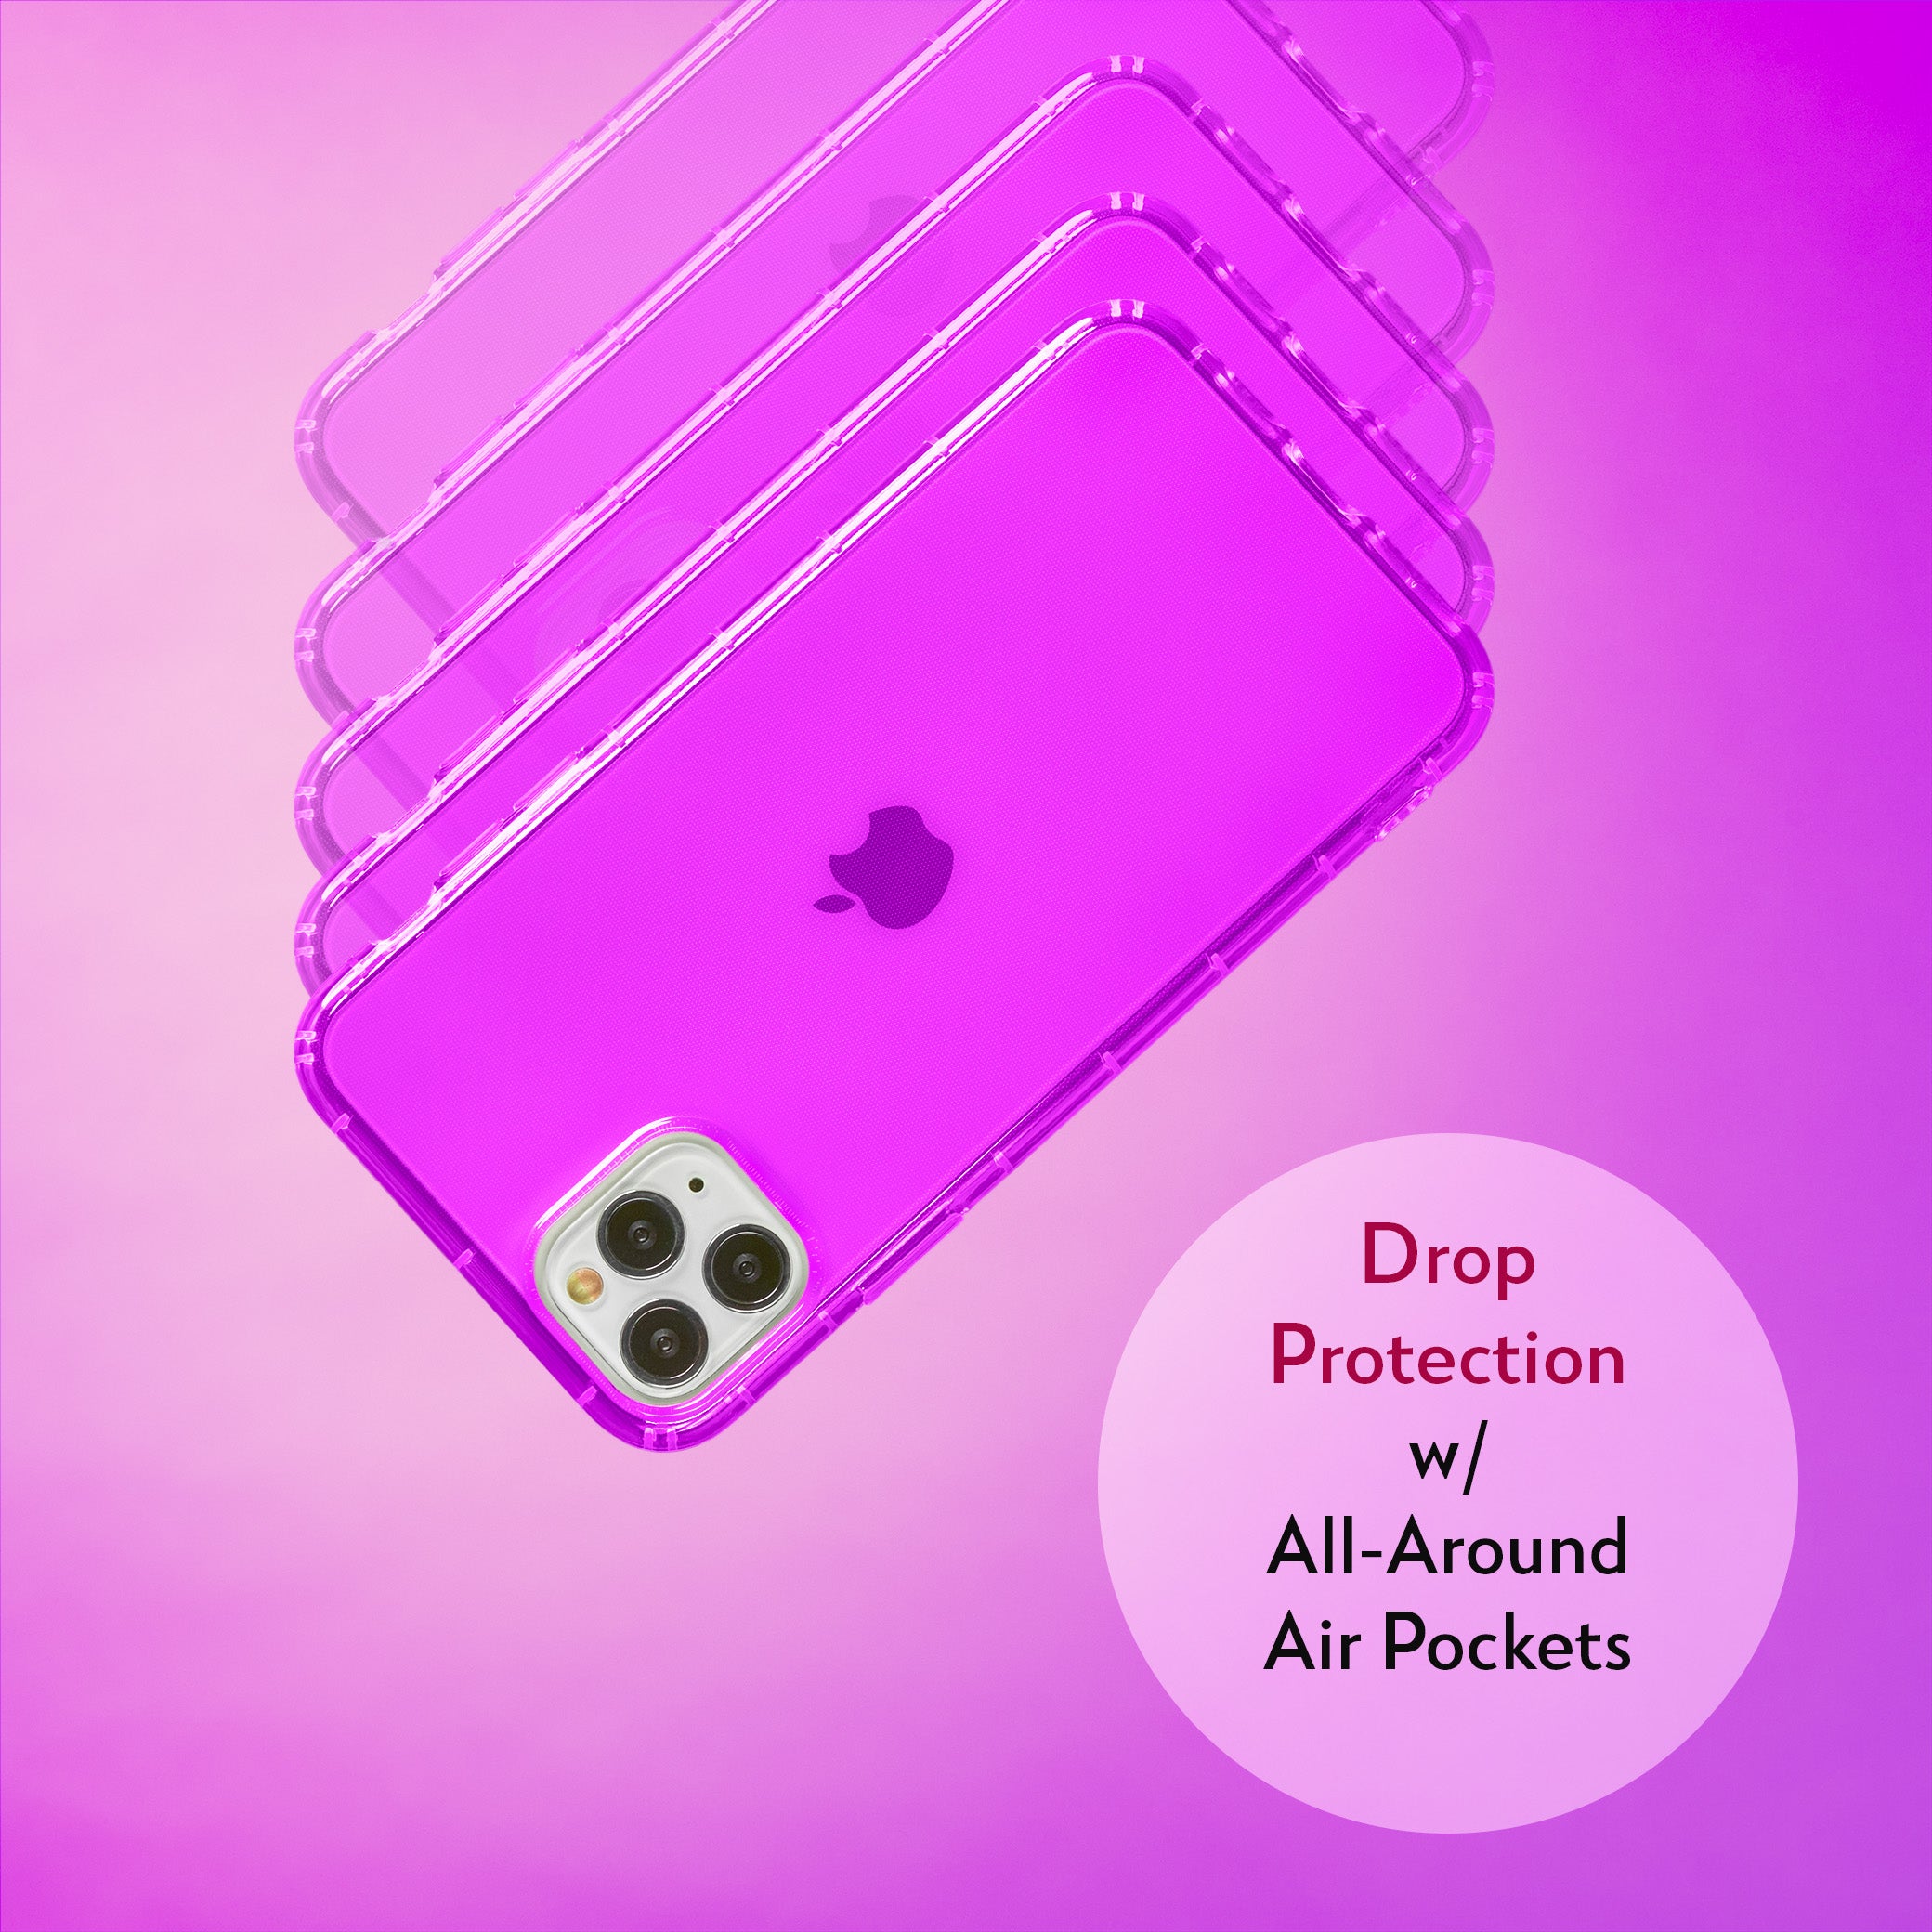 Highlighter Case for iPhone 11 Pro Max - Saturated Vivid Purple